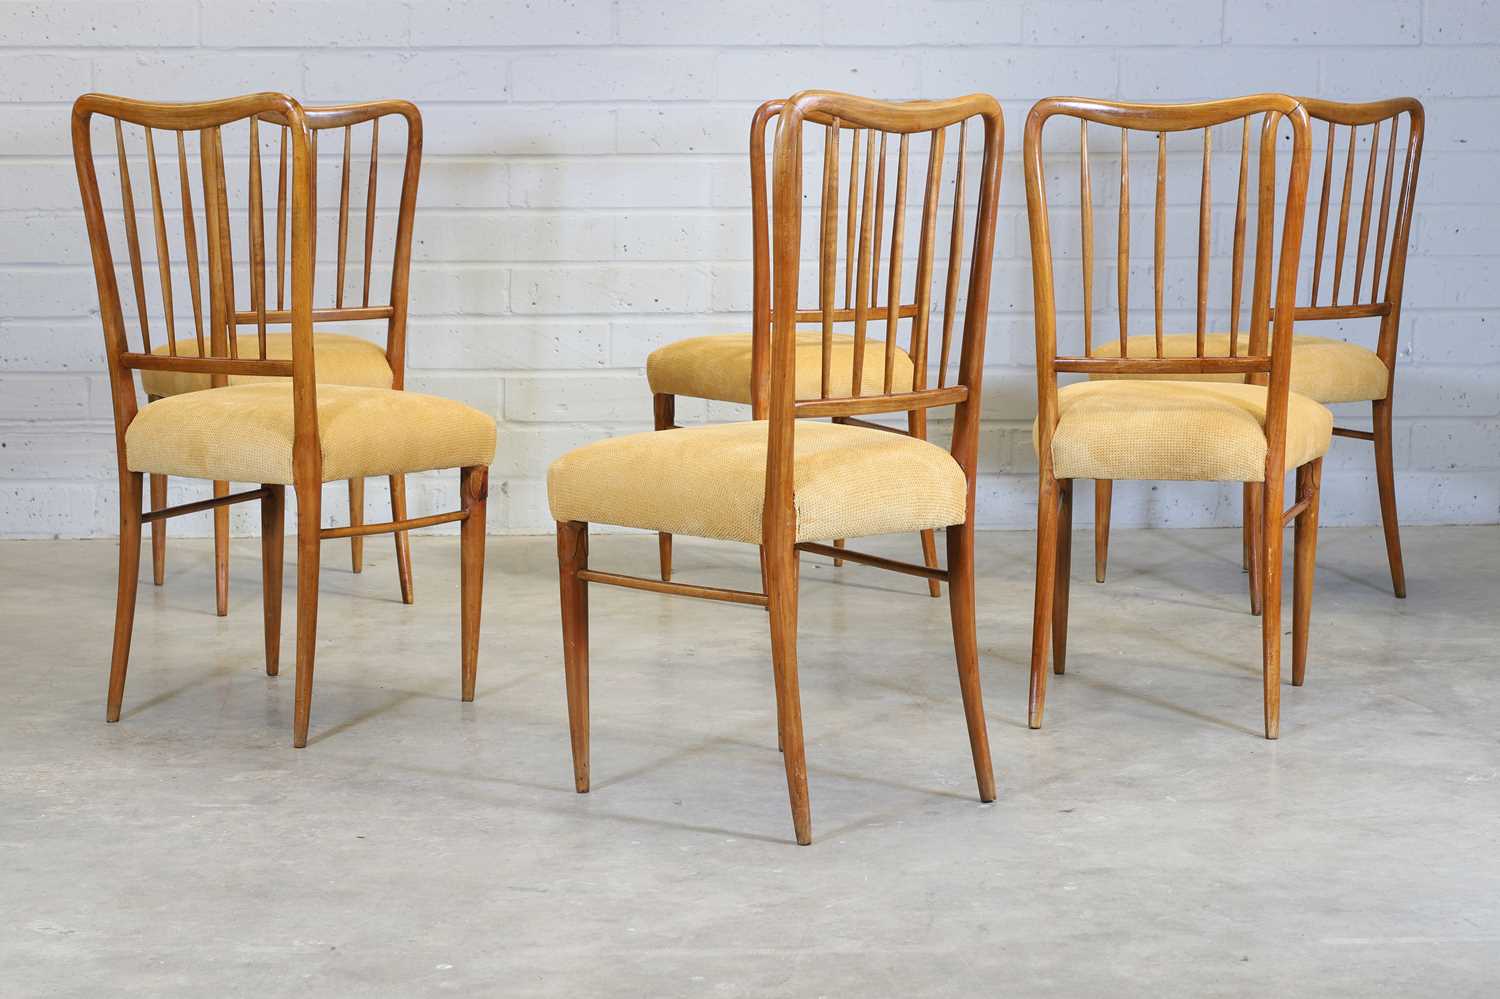 A set of six Italian fruitwood chairs, - Image 3 of 6